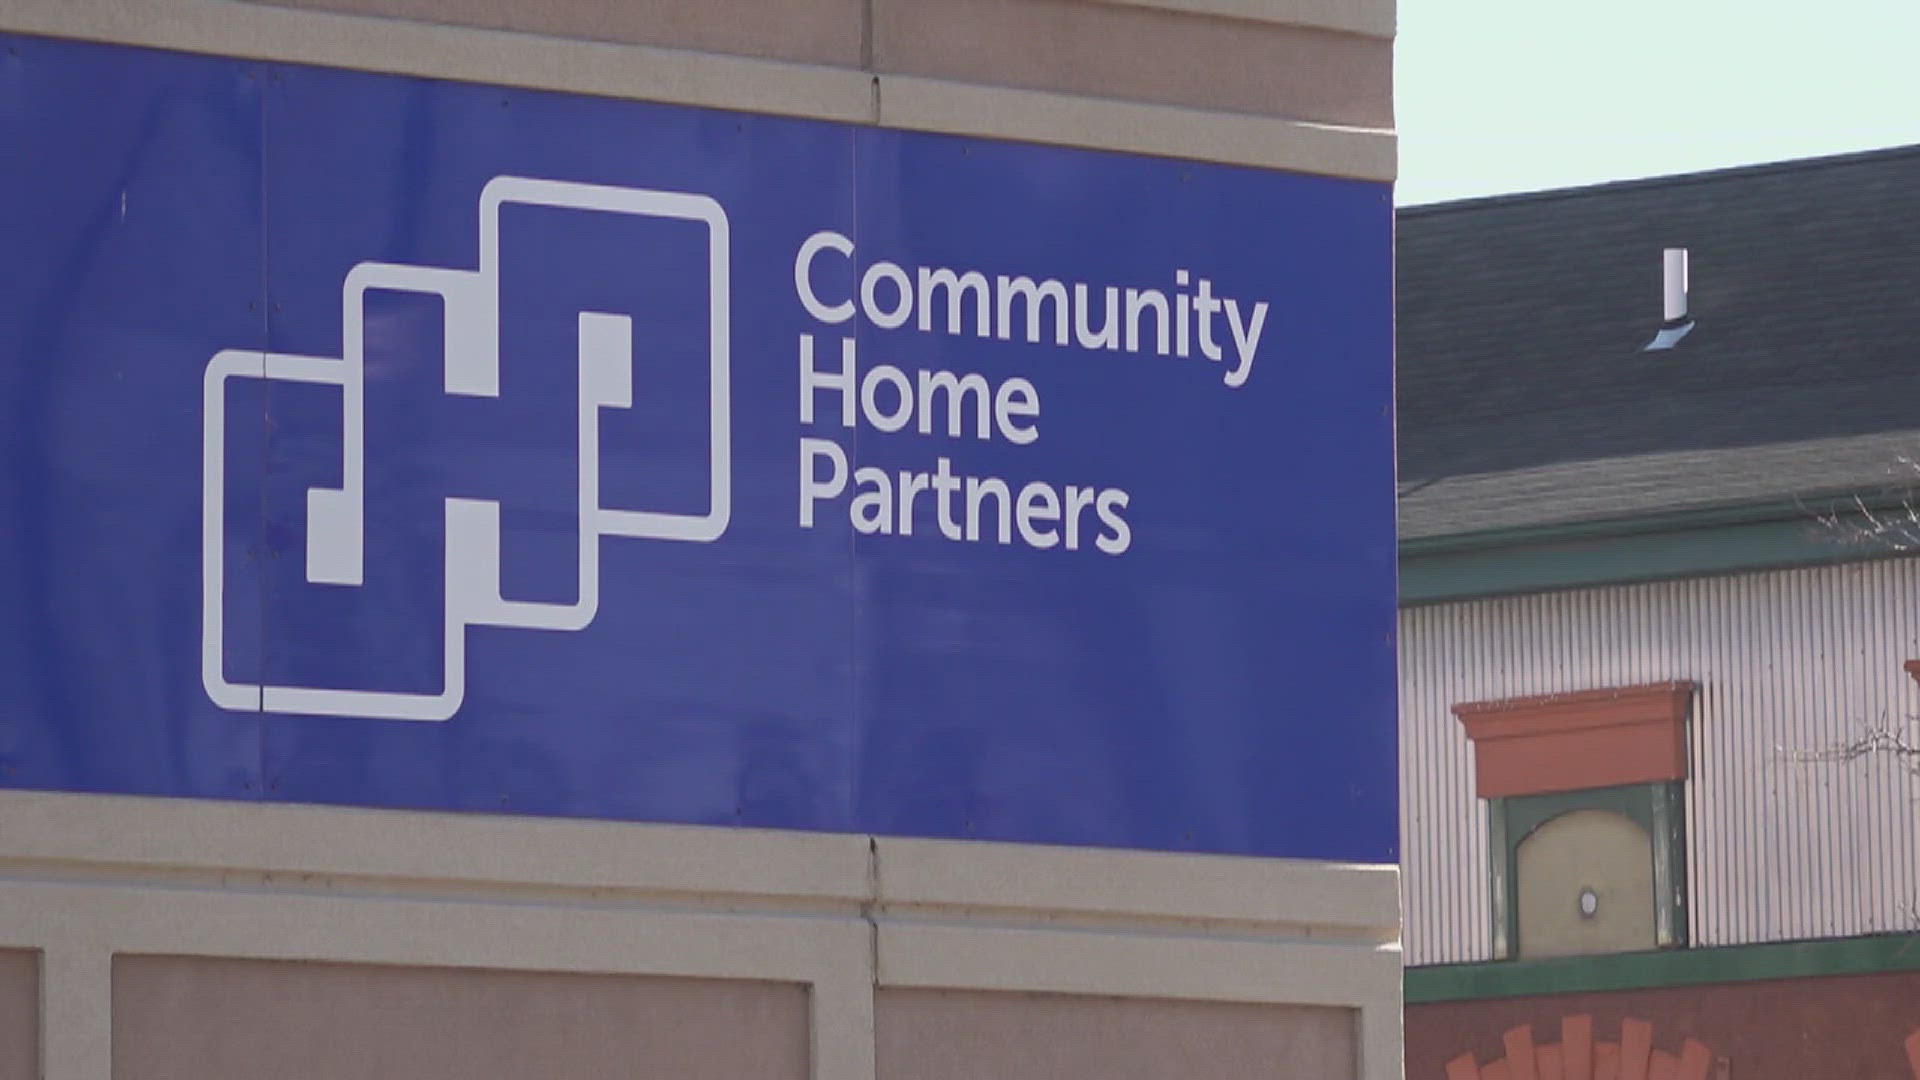 Community Home Partners is leading the project and says it will address specific housing issues veterans face.